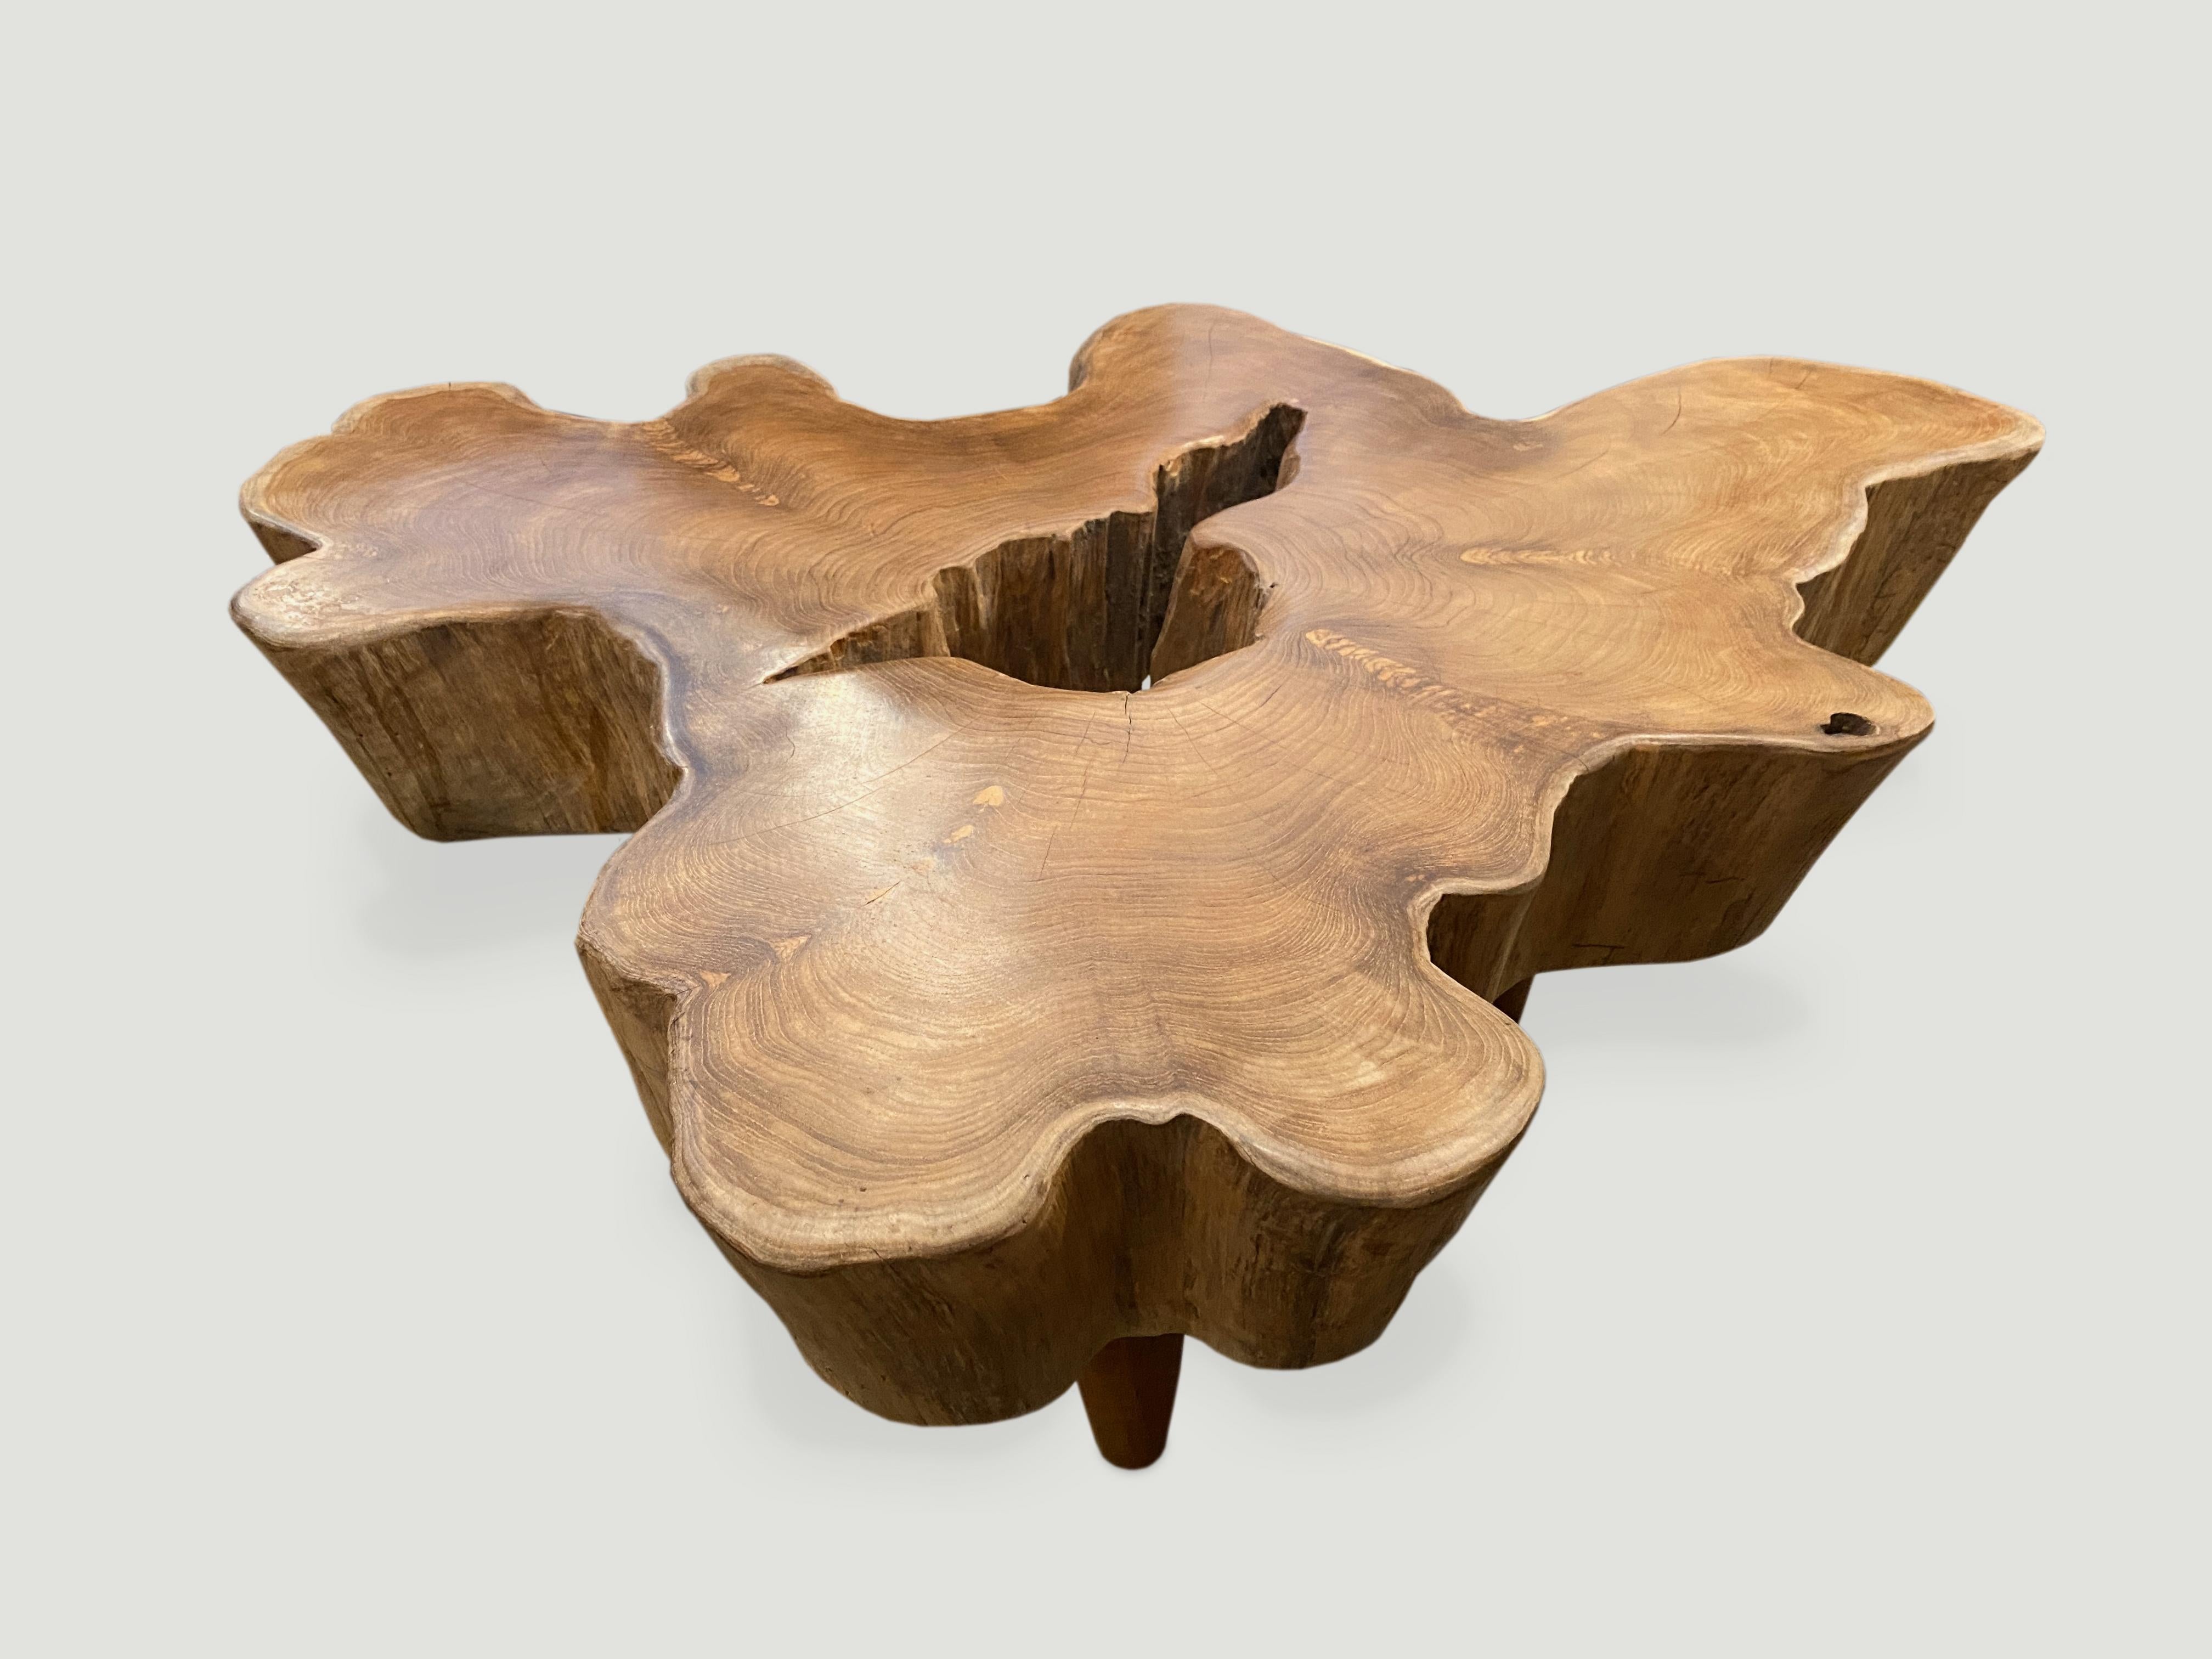 Reclaimed teak wood coffee table with a natural oil finish on the top and the sides left raw. Impressive single 6” slab top floating on midcentury style legs. Organic with a twist.

Andrianna Shamaris. The Leader In Modern Organic Design.